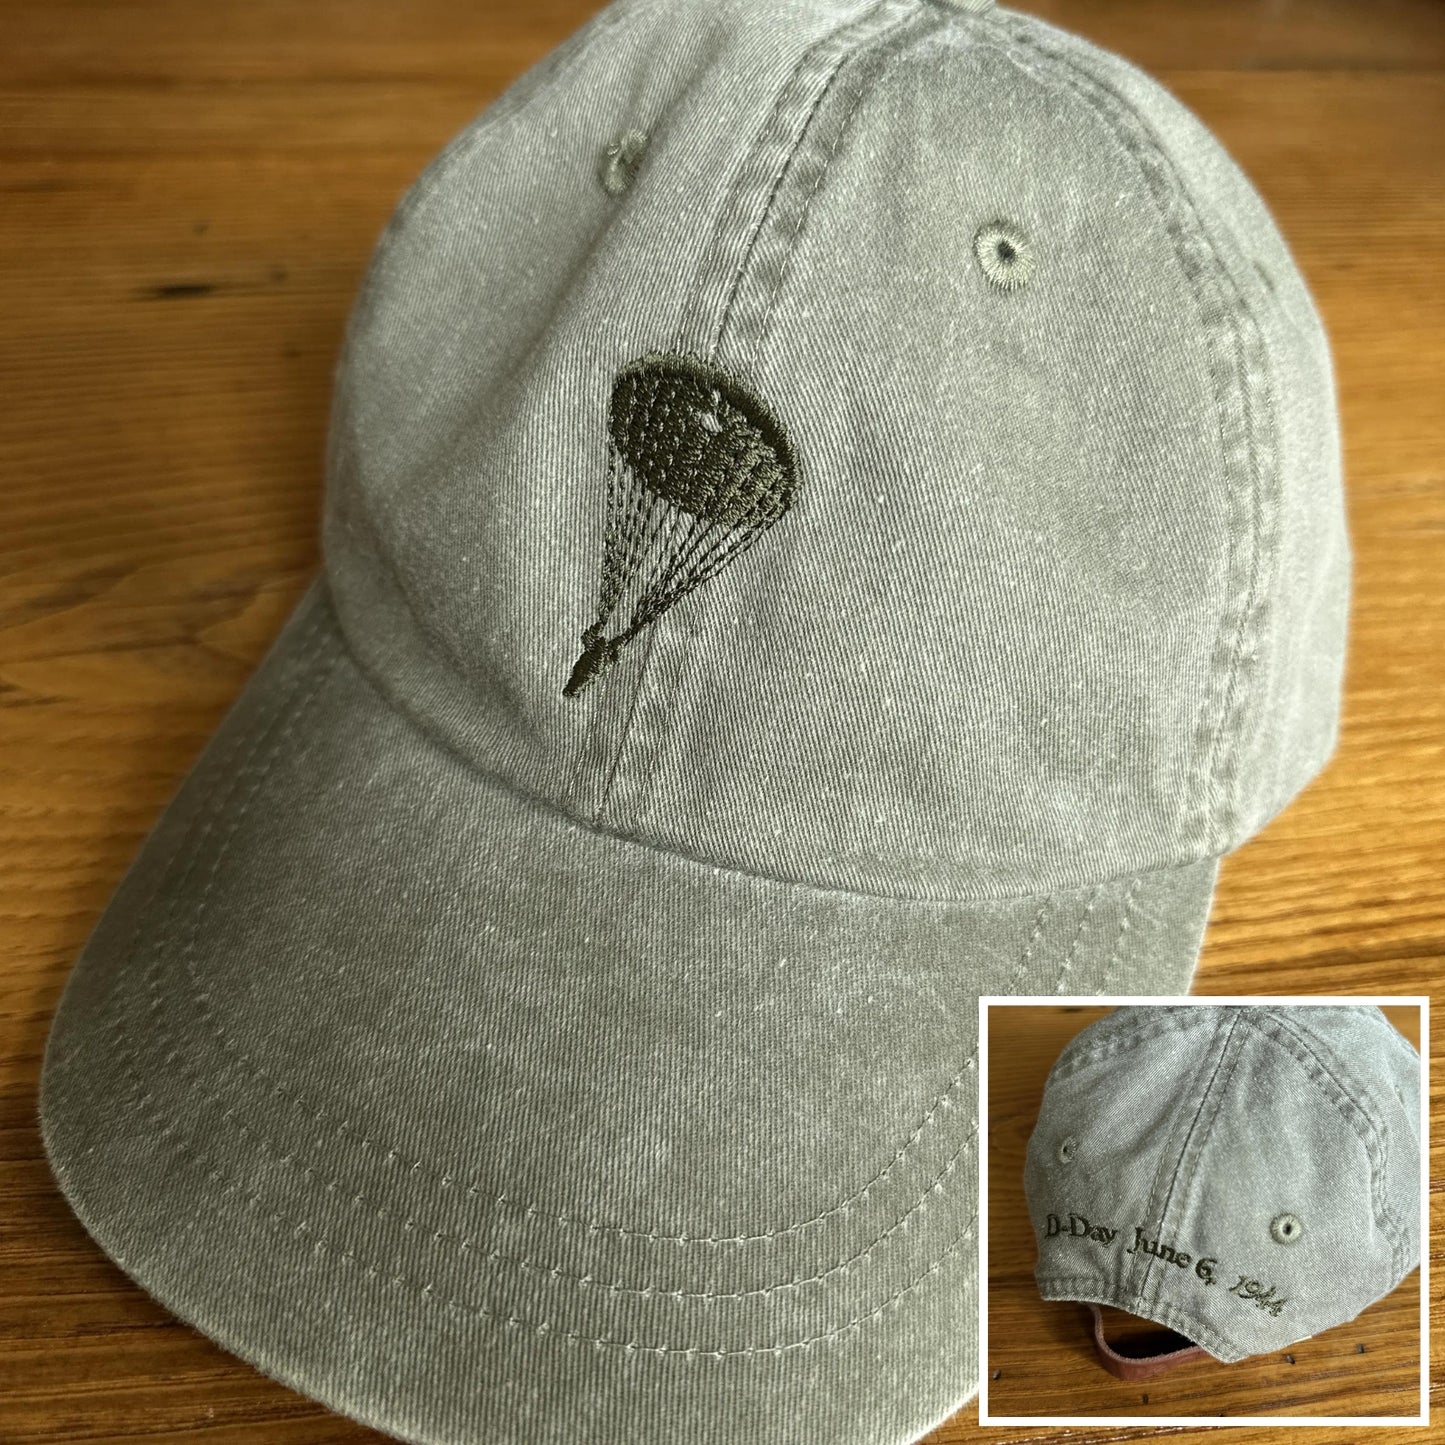 D-Day cap with WWII paratrooper